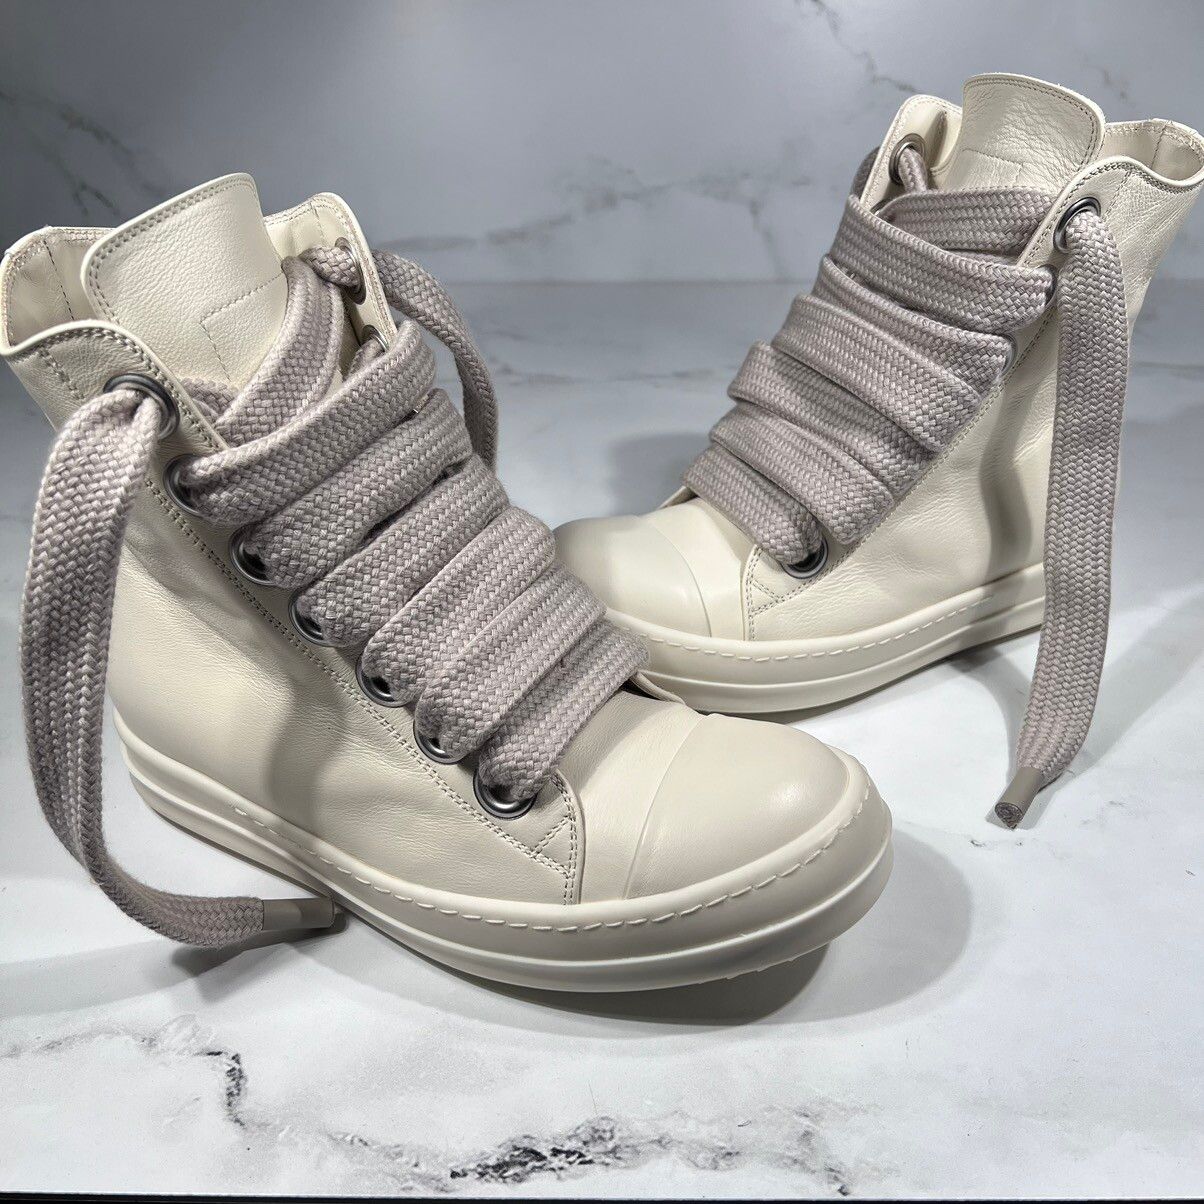 Rick Owens Rick Owens Ramones Milk Leather Thick Lace High Top Sneakers Size US 7 / IT 37 - 5 Thumbnail